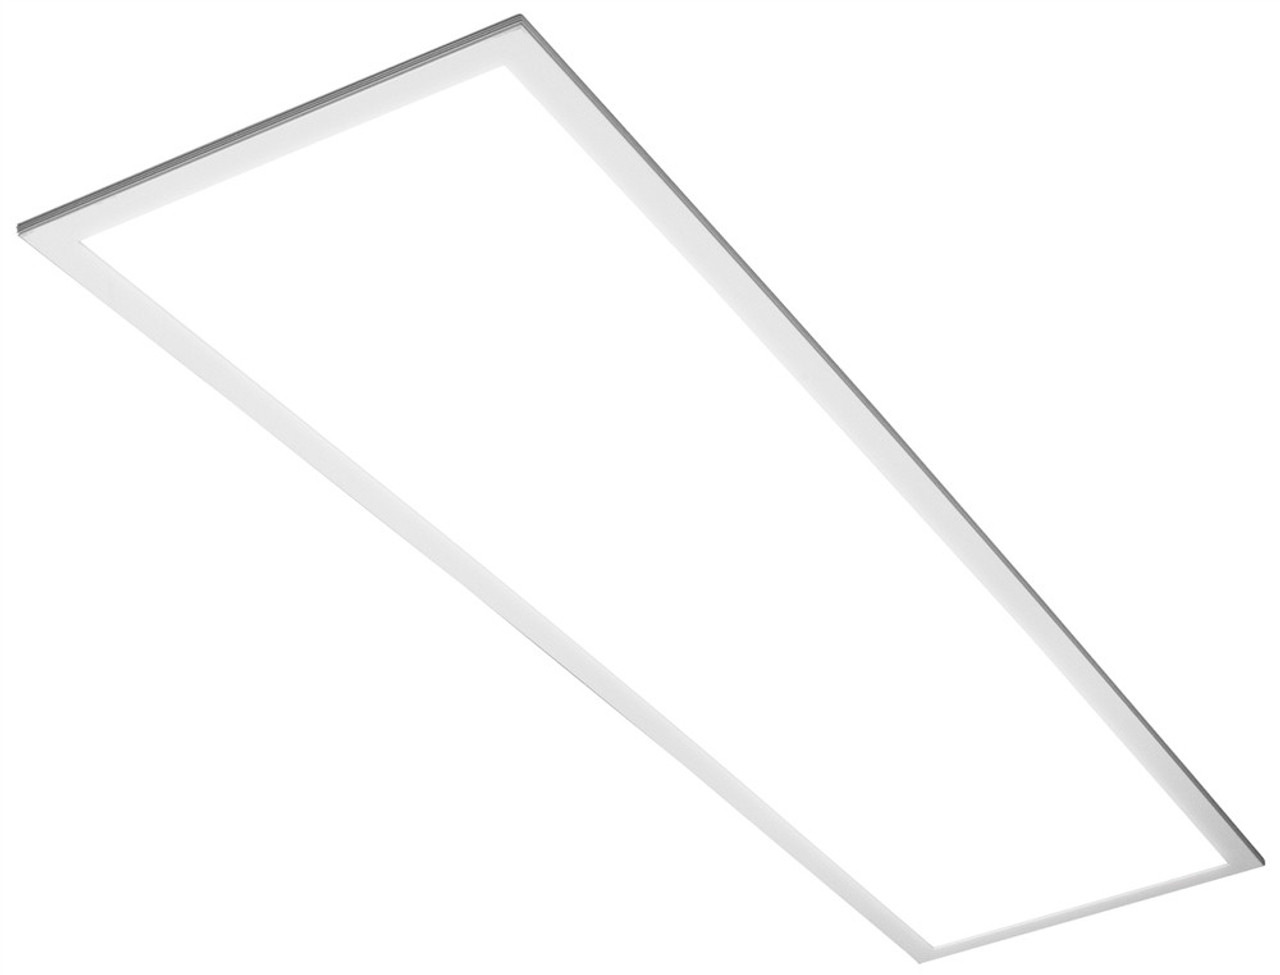 Øl Selvrespekt Burger LED Panel Recessed Fixture 1x4 - 4000K Cool White - Dimmable - With Extra  Recessed Sheet Rock Kit